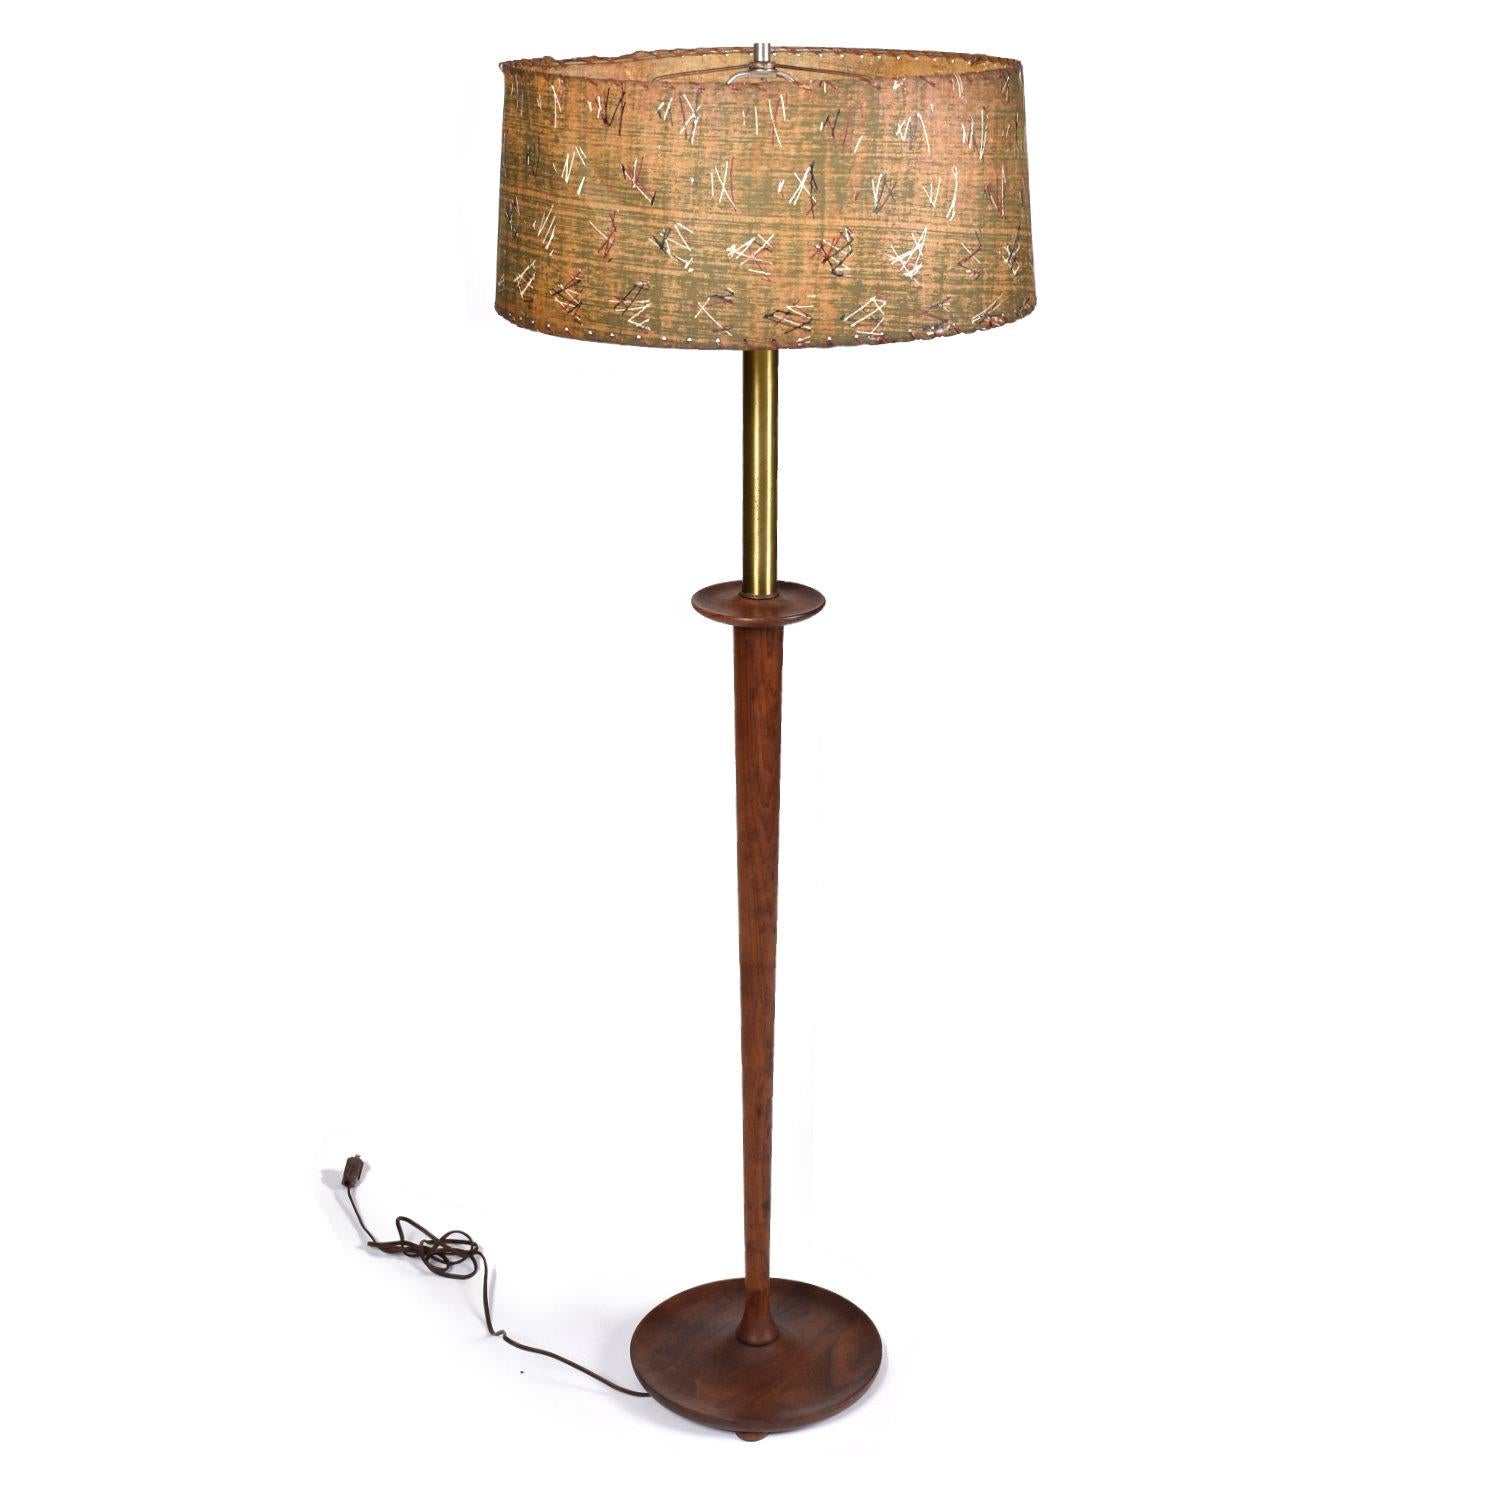 The lamps shades pictured ARE NOT included with purchase.

Mid-Century Modern solid walnut wood Danish modern floor lamp and matching table lamp. We’ve never had a matching lamp set that included a floor lamp and table lamp. This is truly a unique